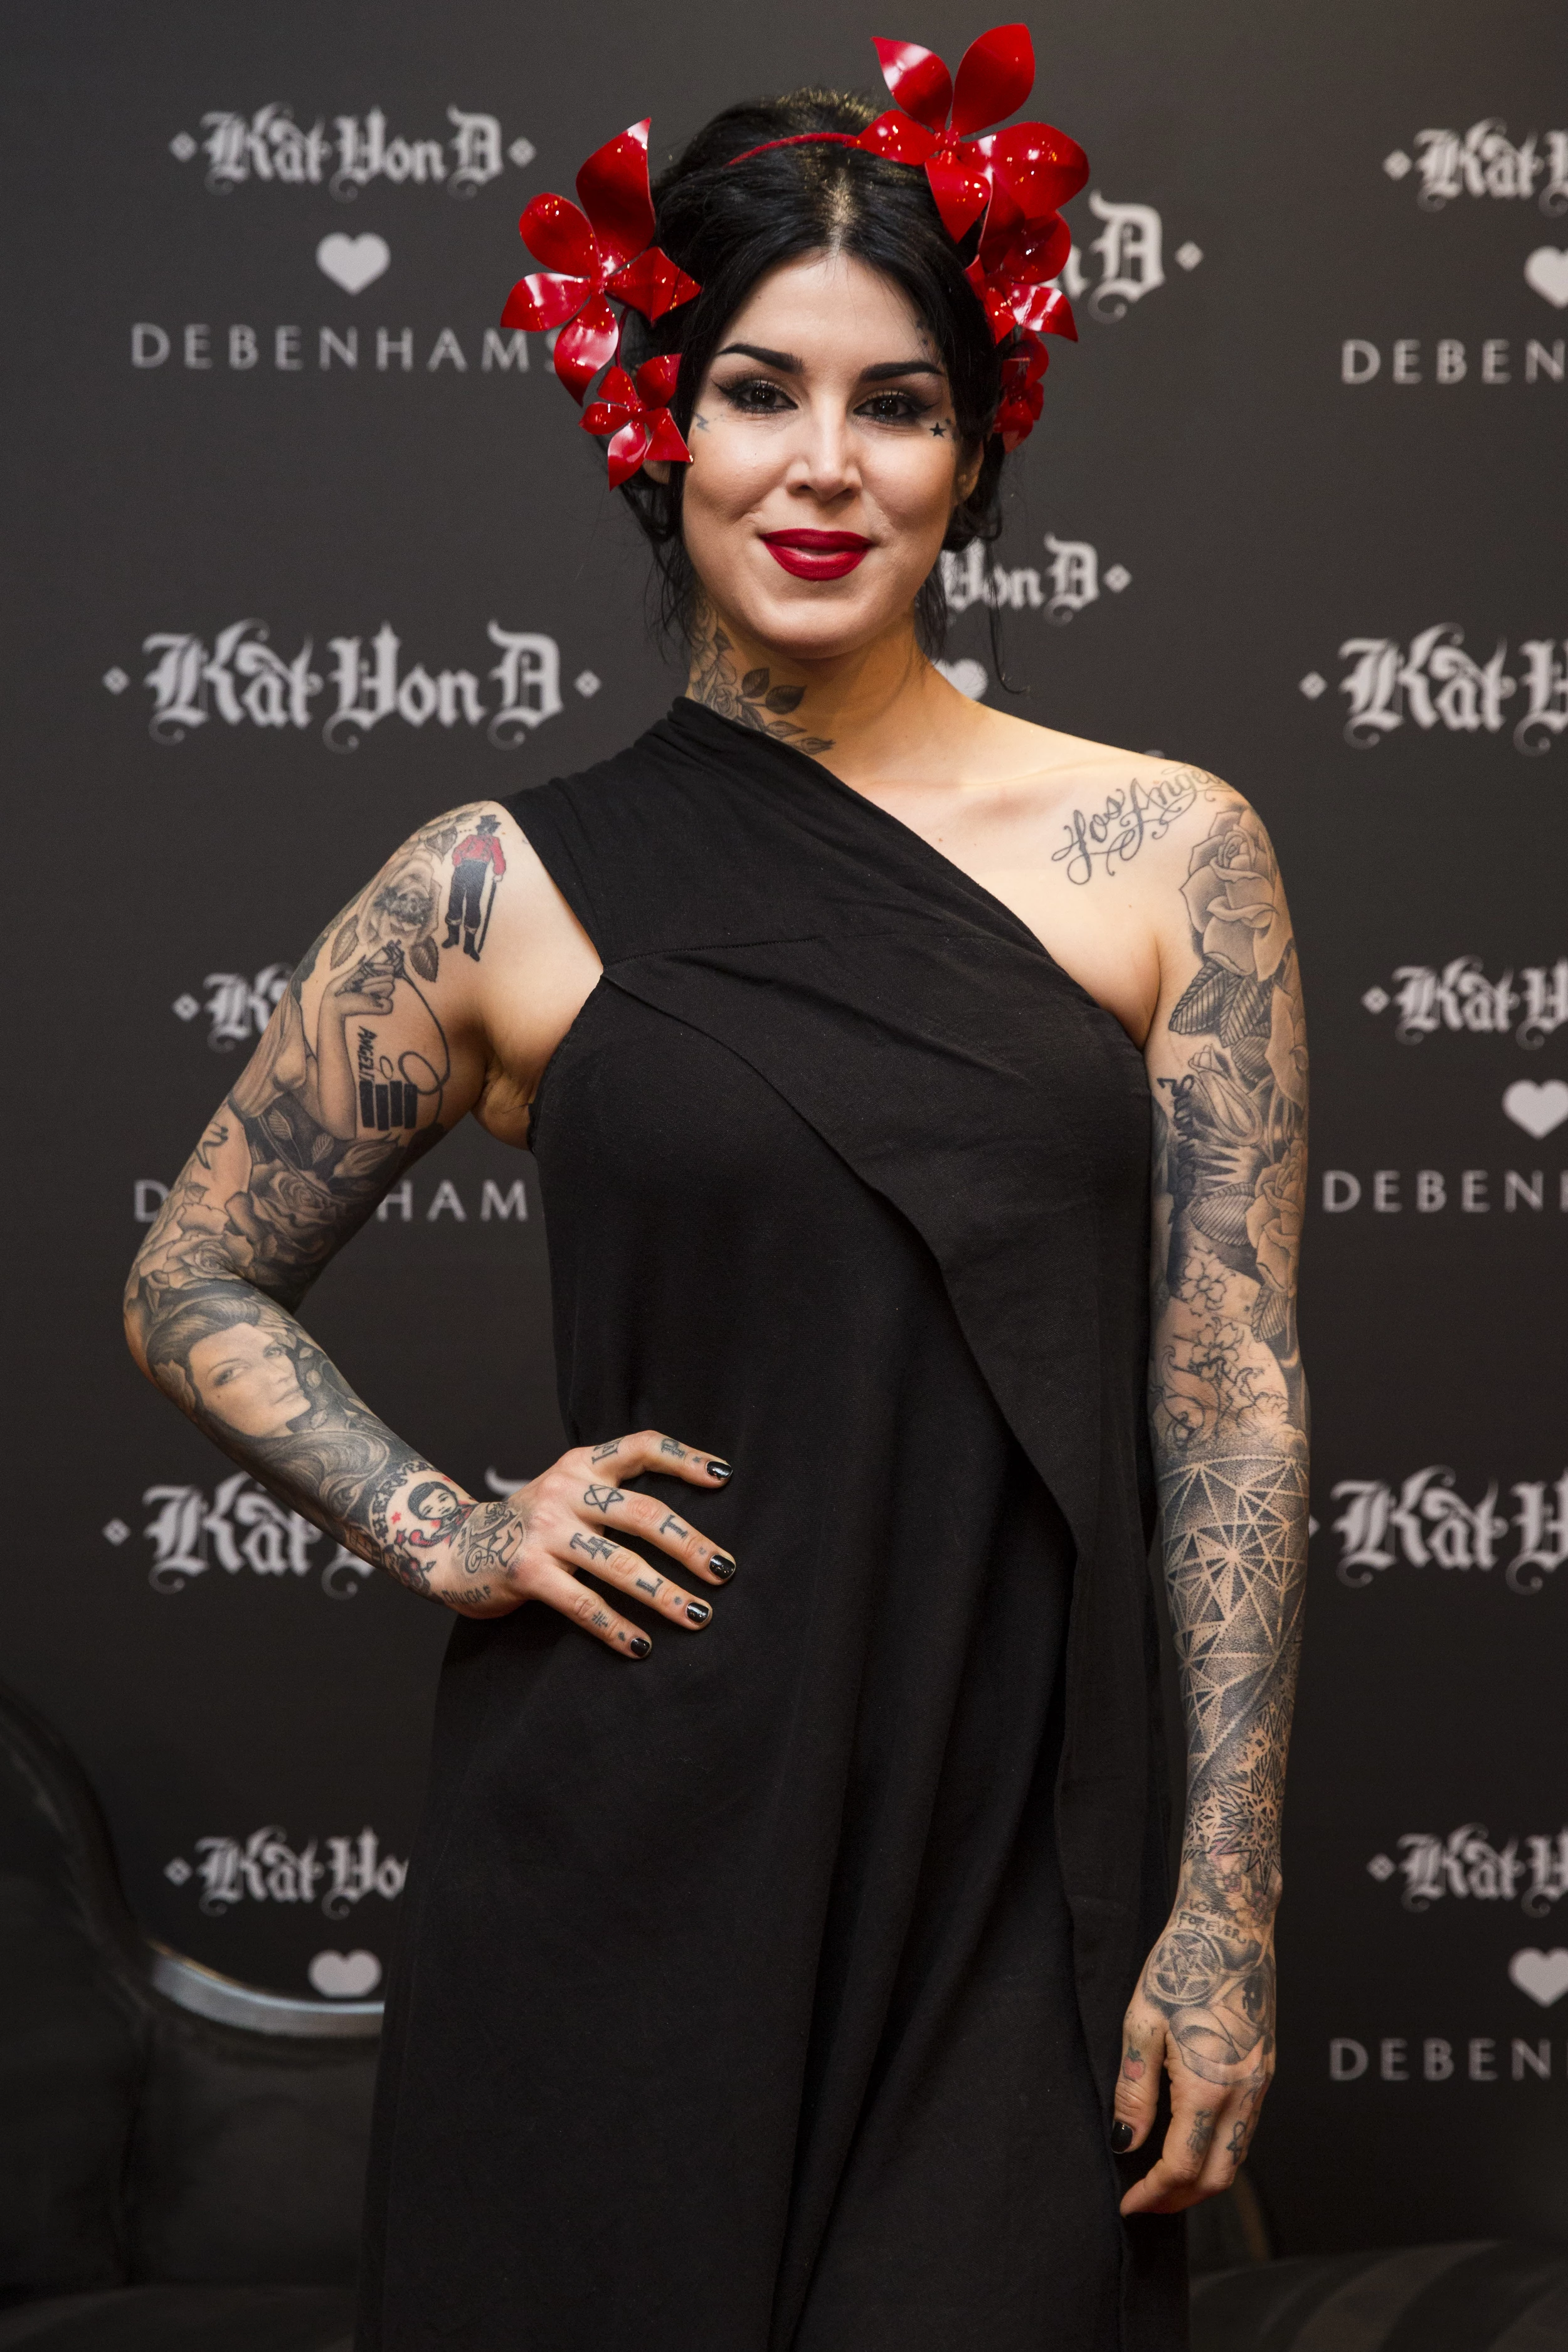 How Much It Really Costs To Get A Tattoo From Kat Von D